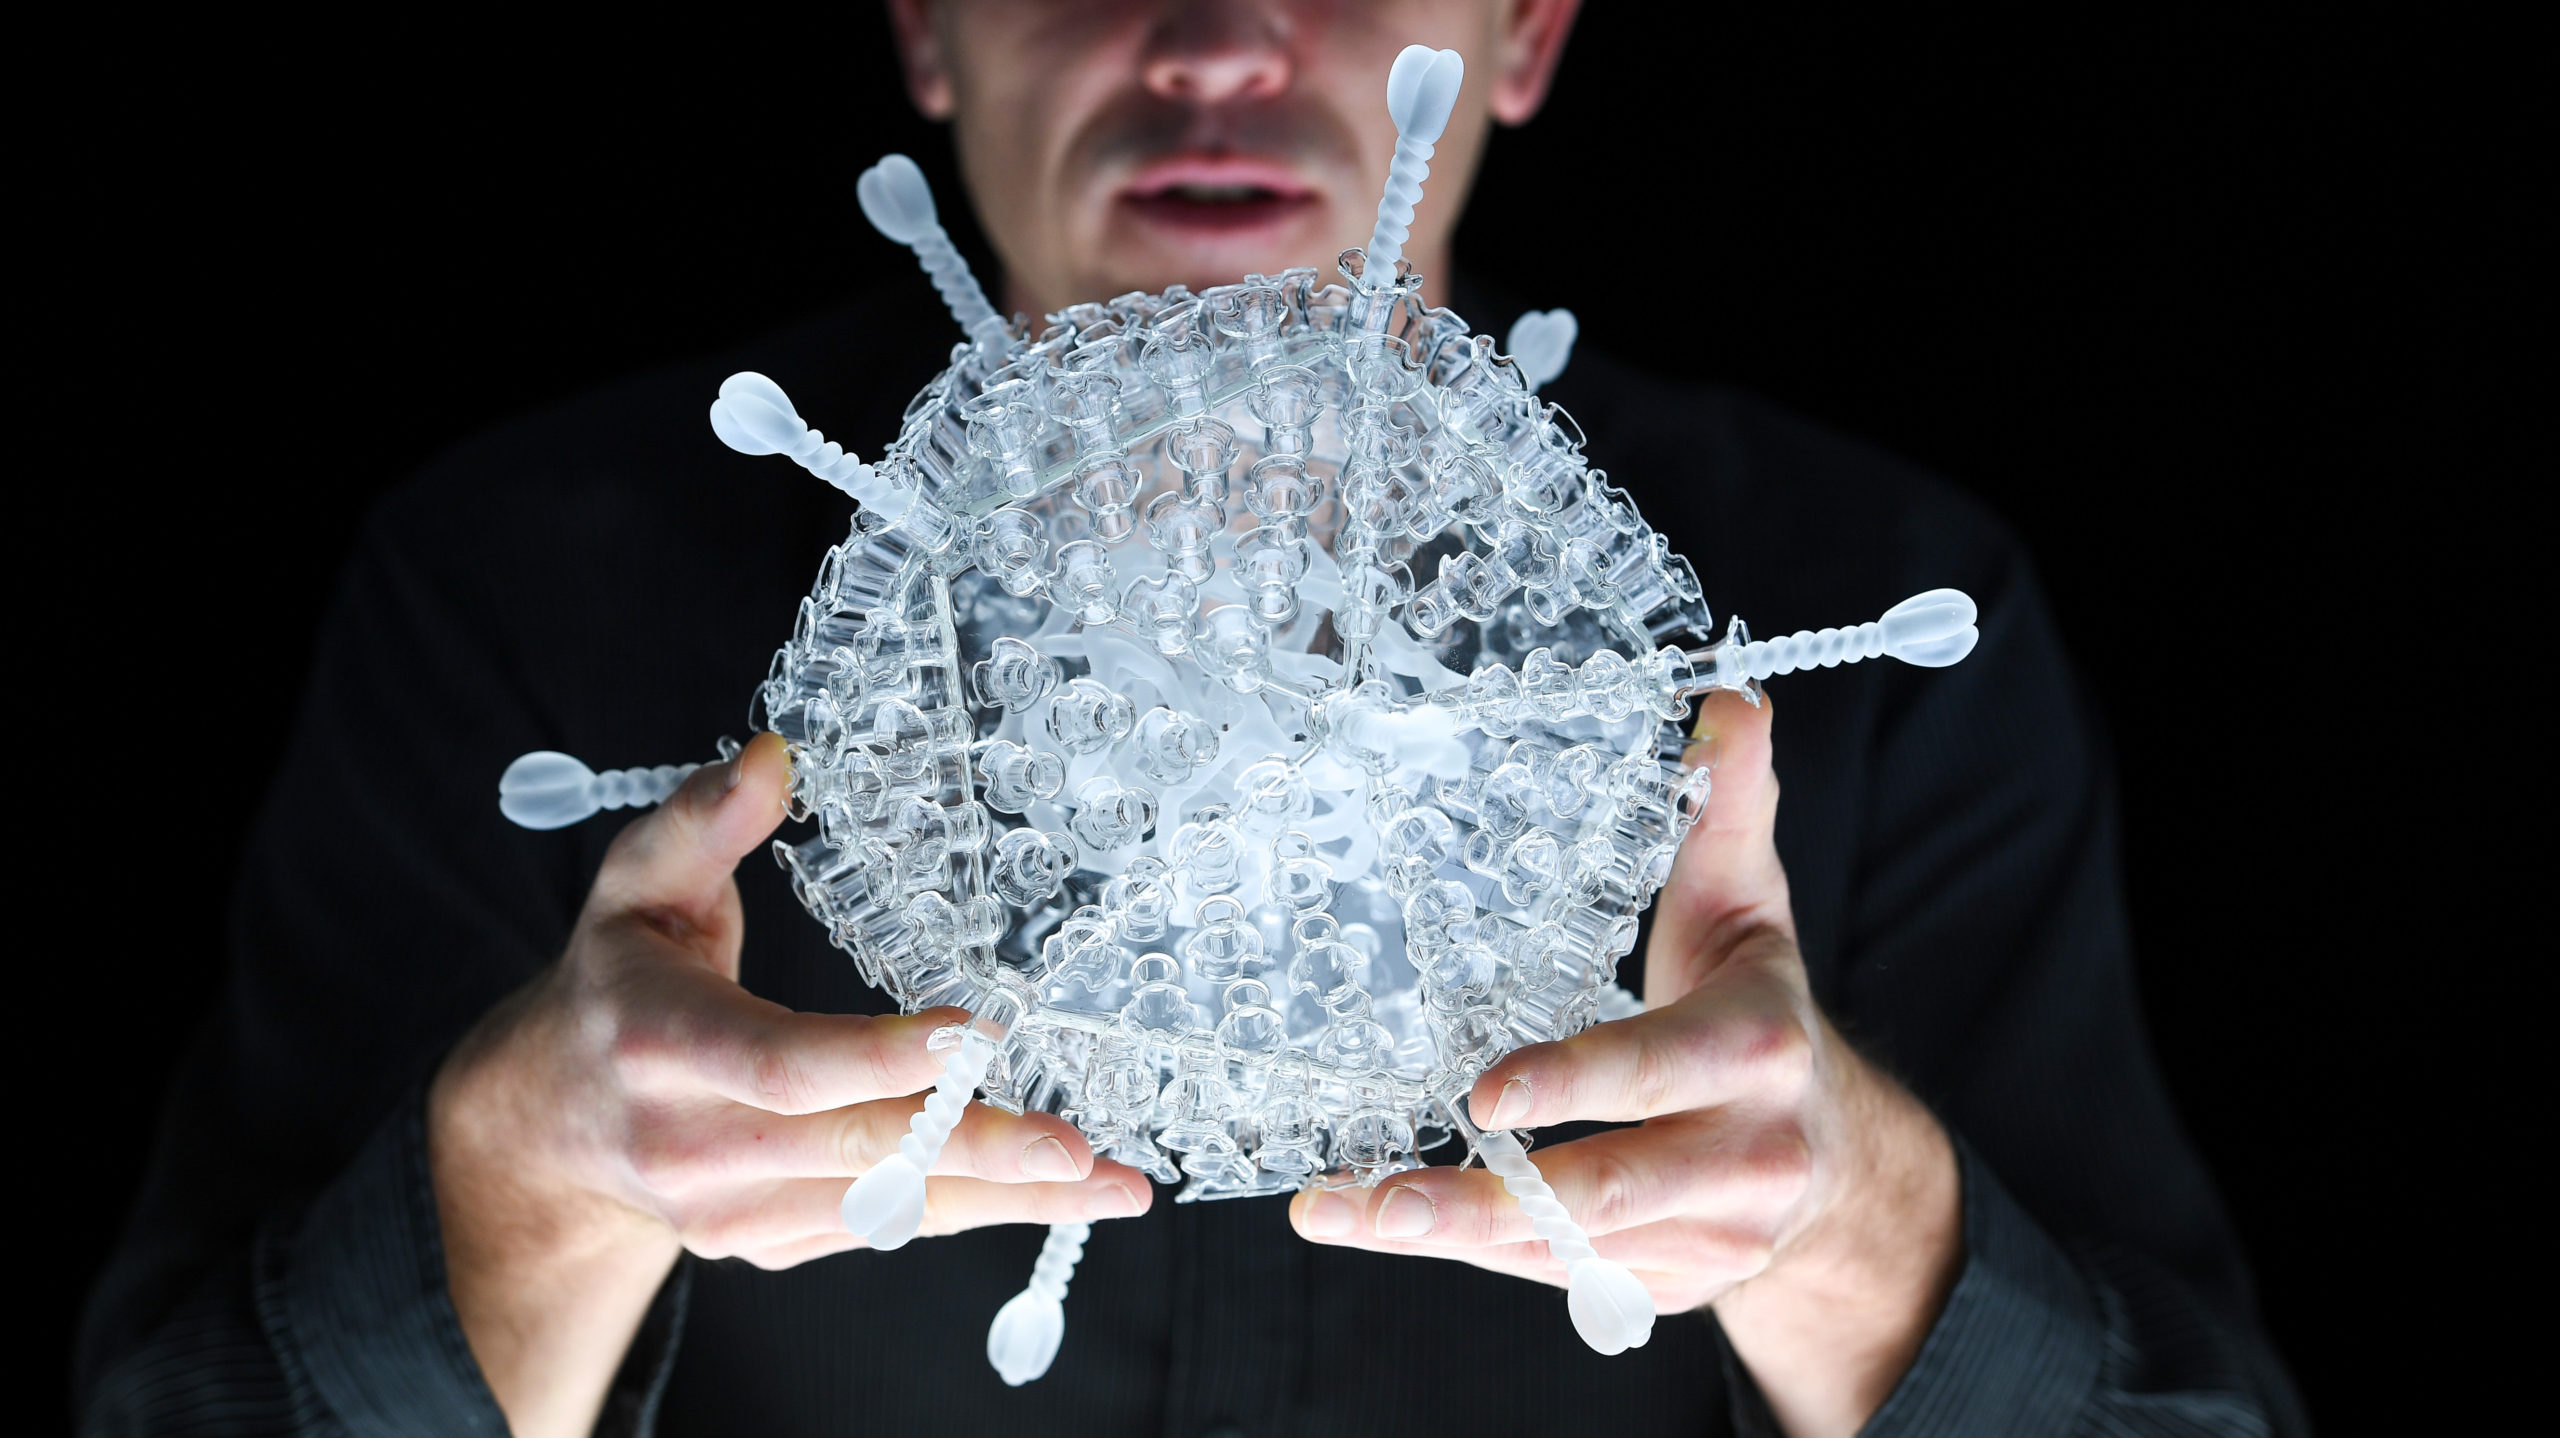 Artist Luke Jerram with his glass sculpture of the Oxford-AstraZeneca coronavirus vaccine at the Paintworks on February 05, 2021 in Bristol, England. (Photo: Finnbarr Webster, Getty Images)